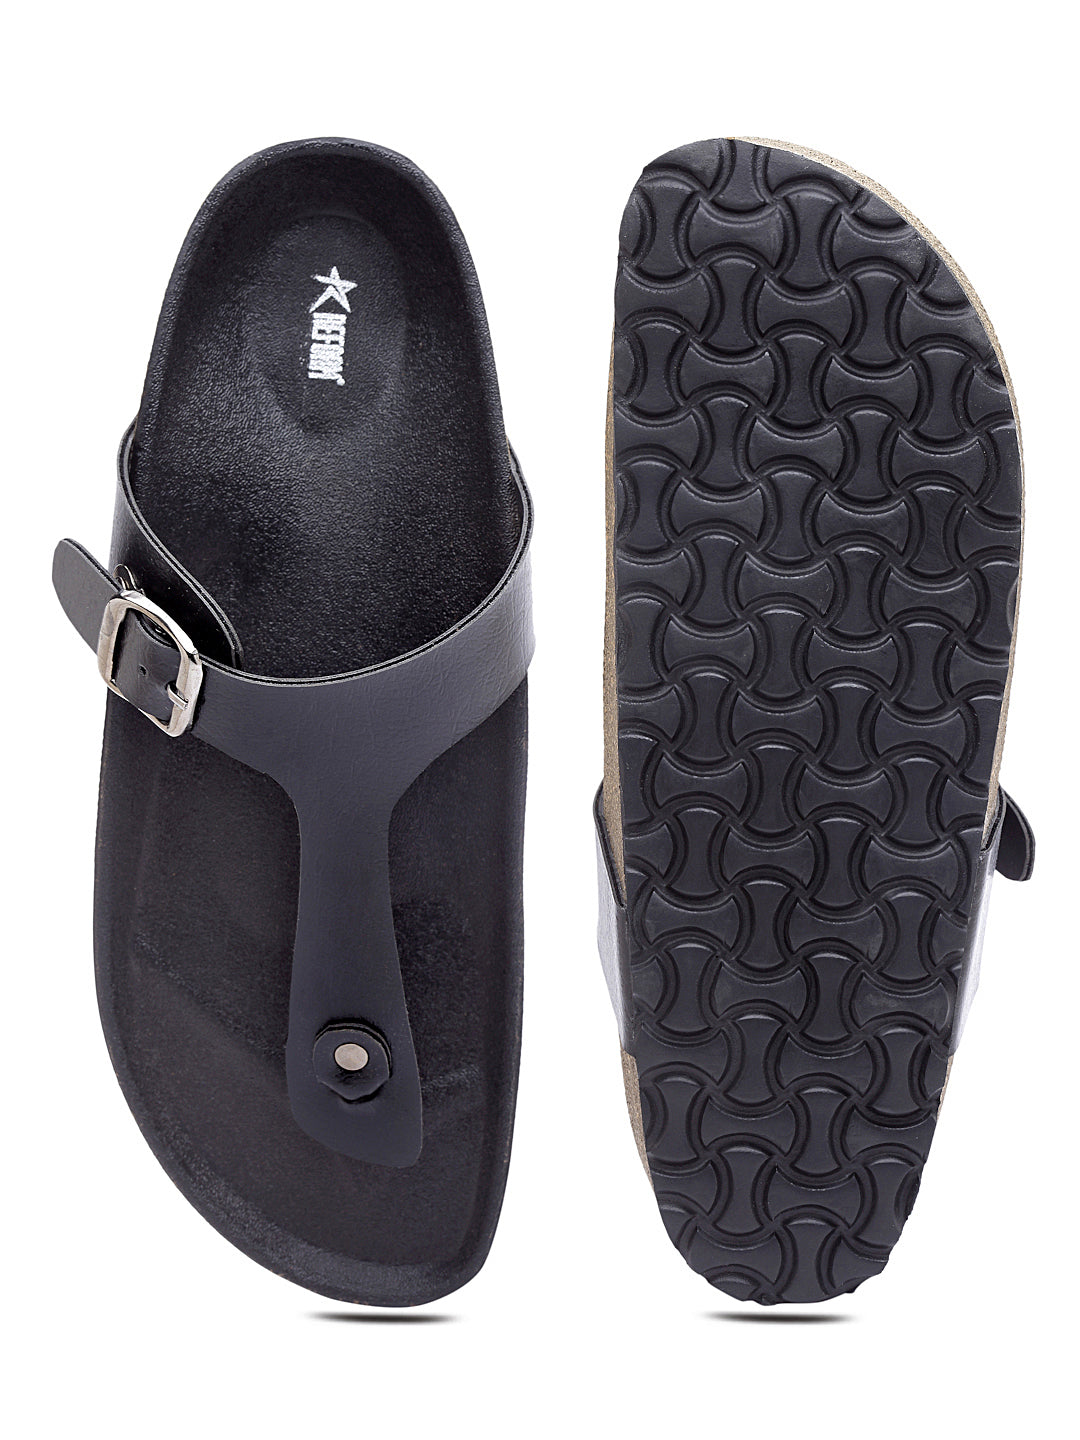 Women's Outdoor Stylish Black Synthetic Leather Casual Sandal